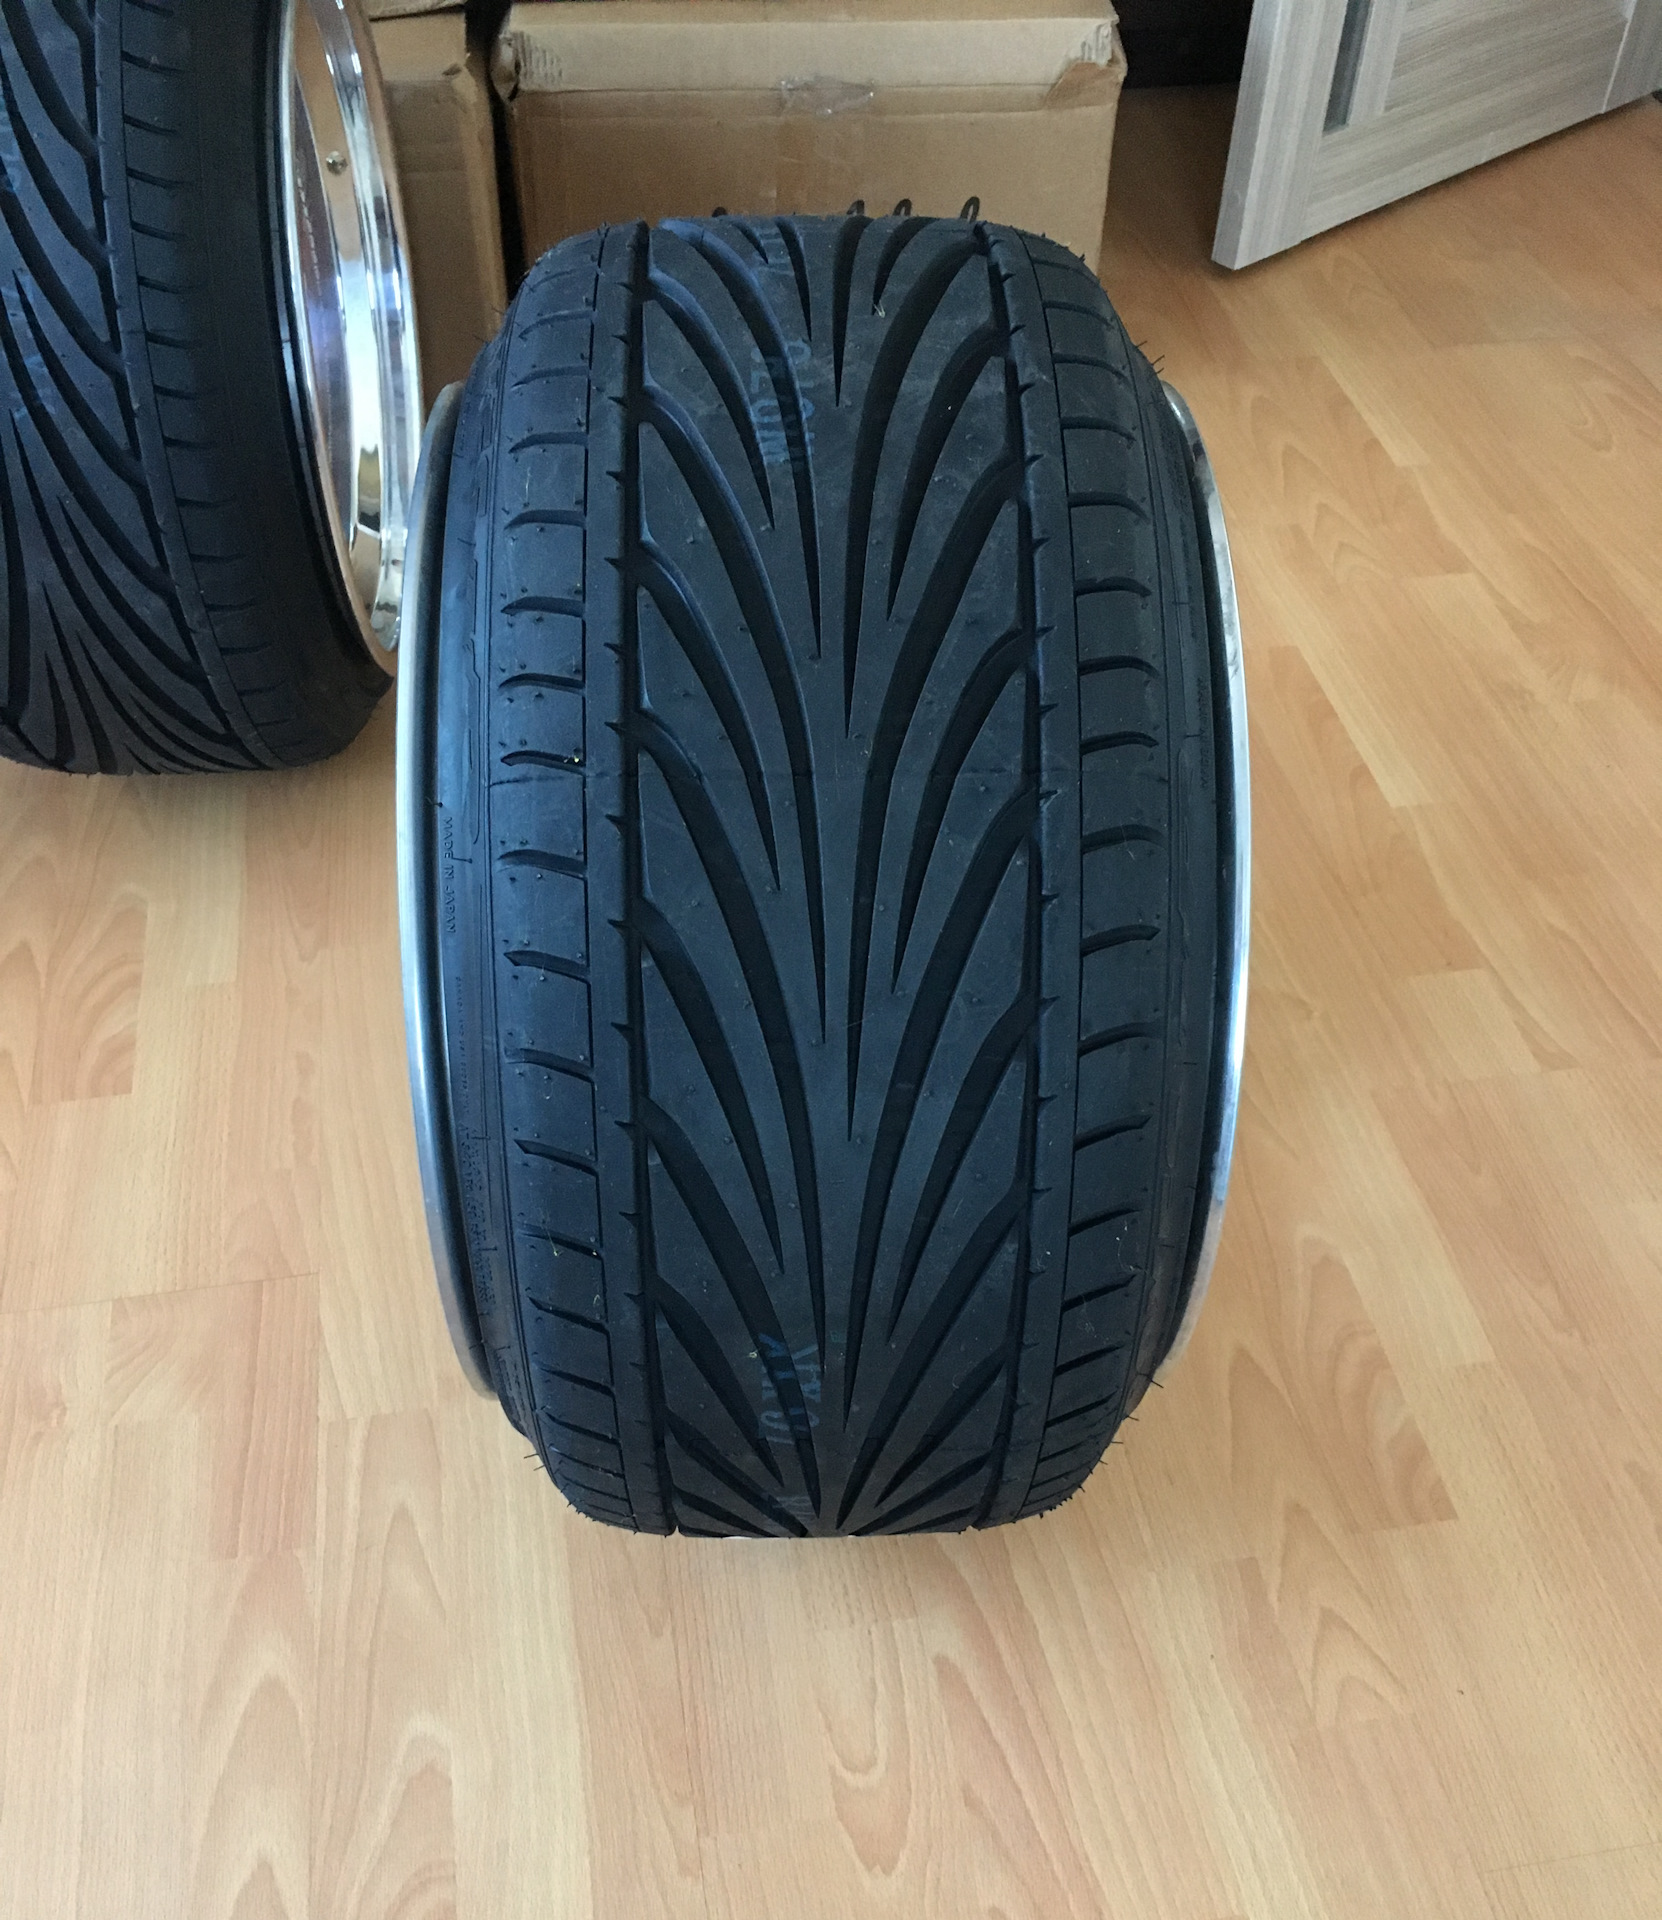 Proxes sport отзывы. Toyo PROXES t1r. Тойо 888 255 35 18. Toyo t1r Sport. Toyo PROXES t1r Sport.